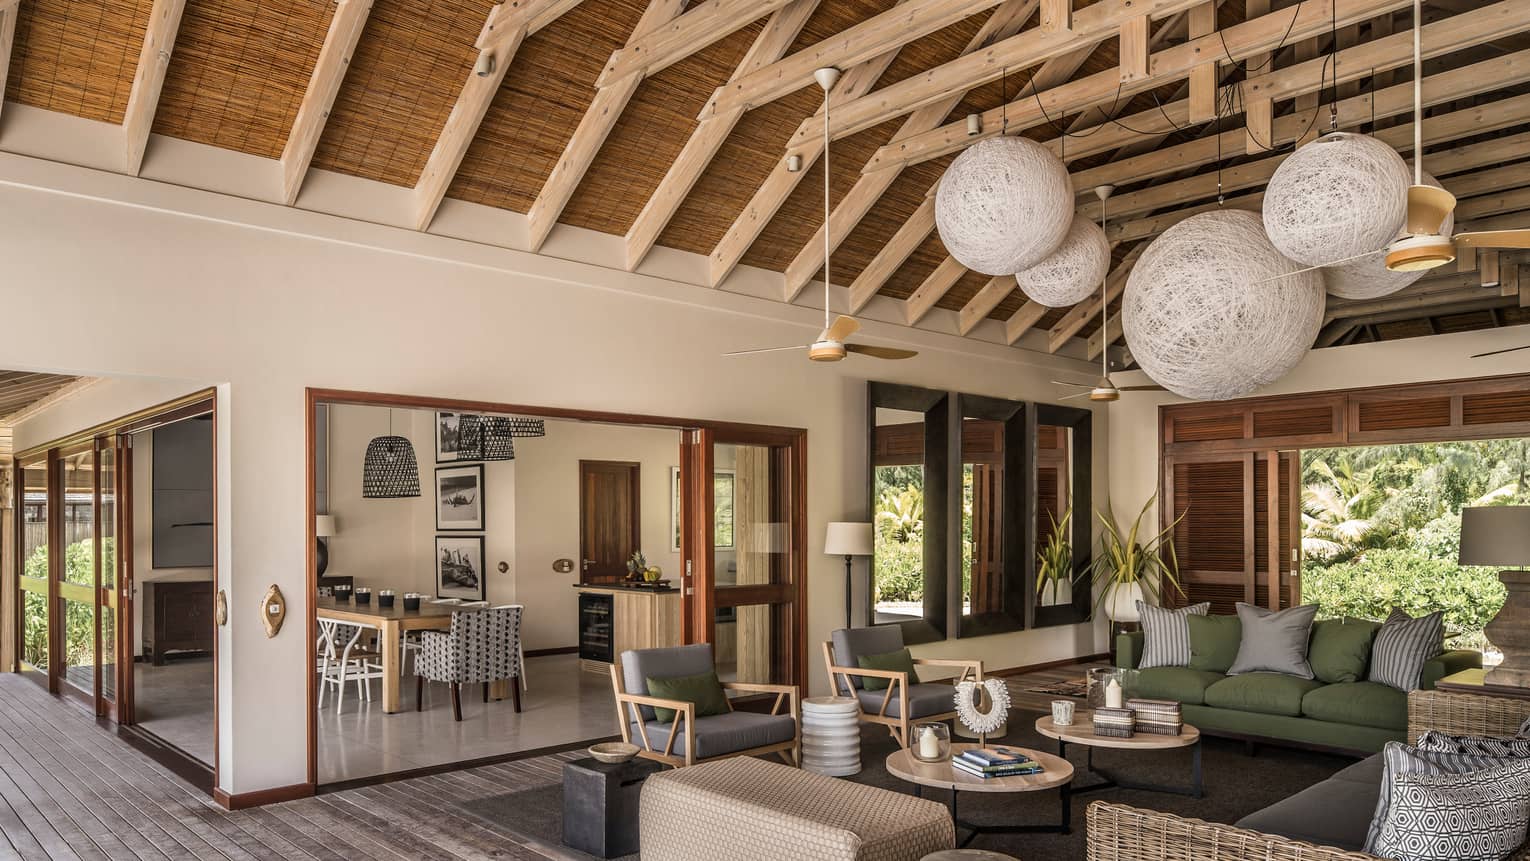 Large wicker globe chandeliers hang from beamed roof over open-air living room